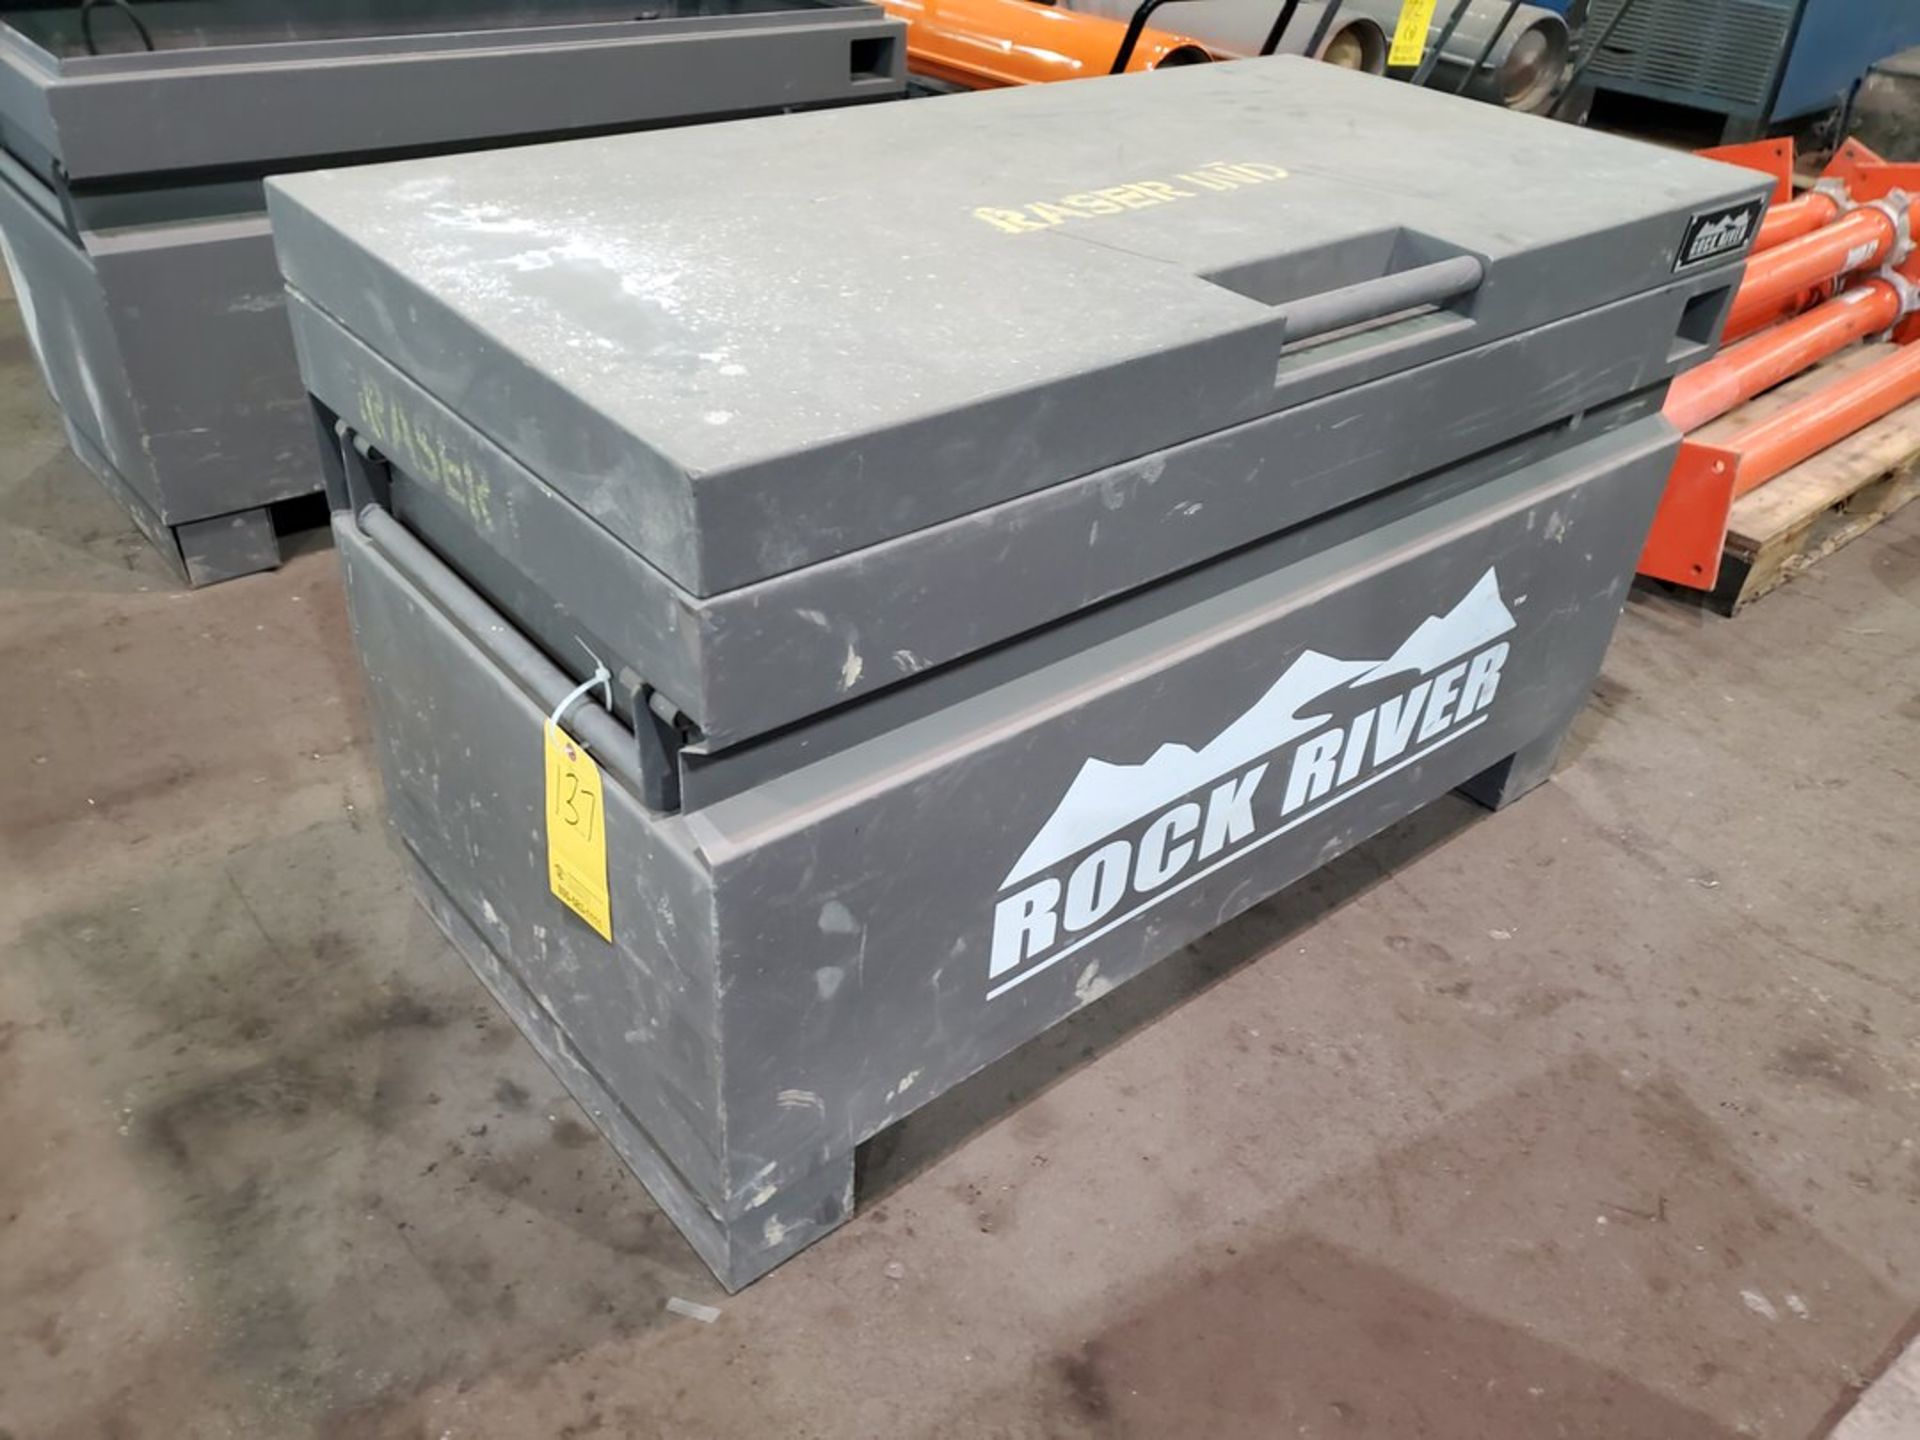 Rock River Job Box W/ Assorted Contents To Inlcude But Not Limited To: Slings, Hvy Duty Clamps,